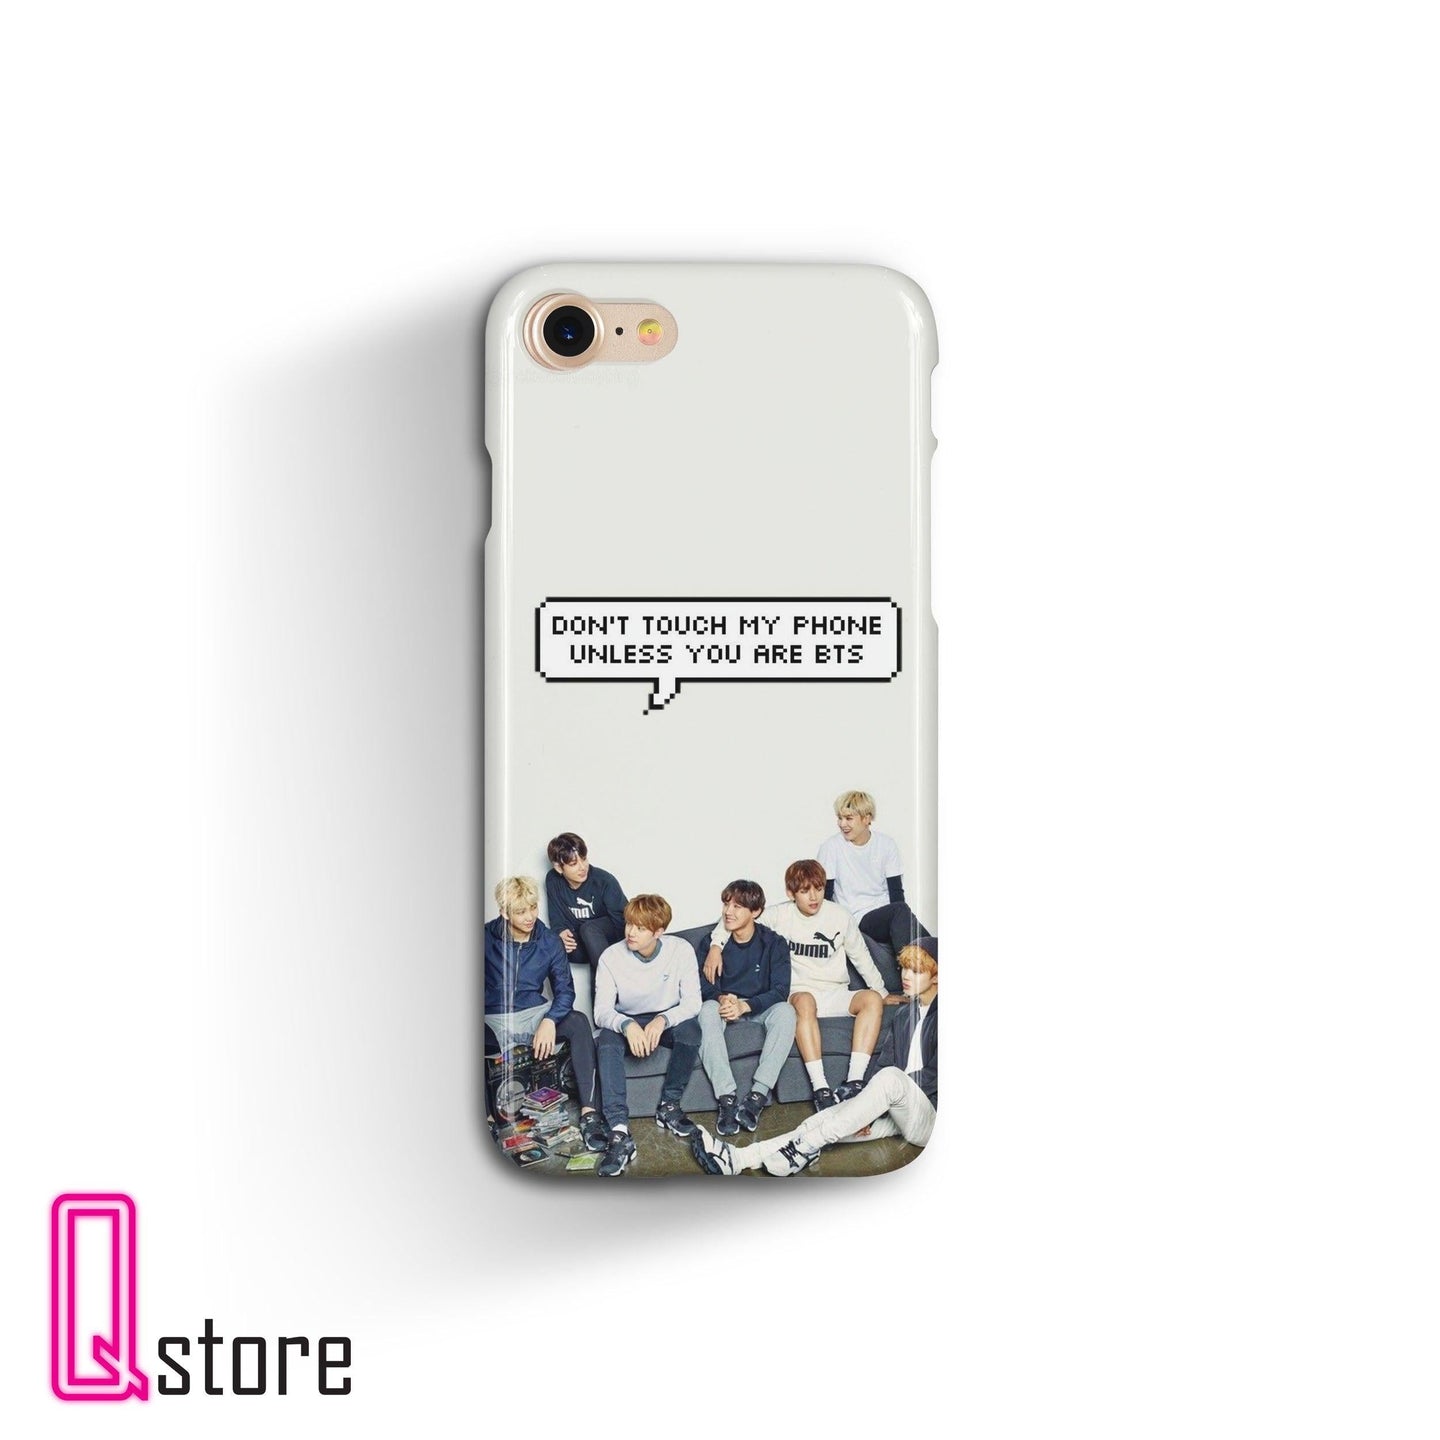 Bts.13 phone cover - Qcase Store | Everyday Case